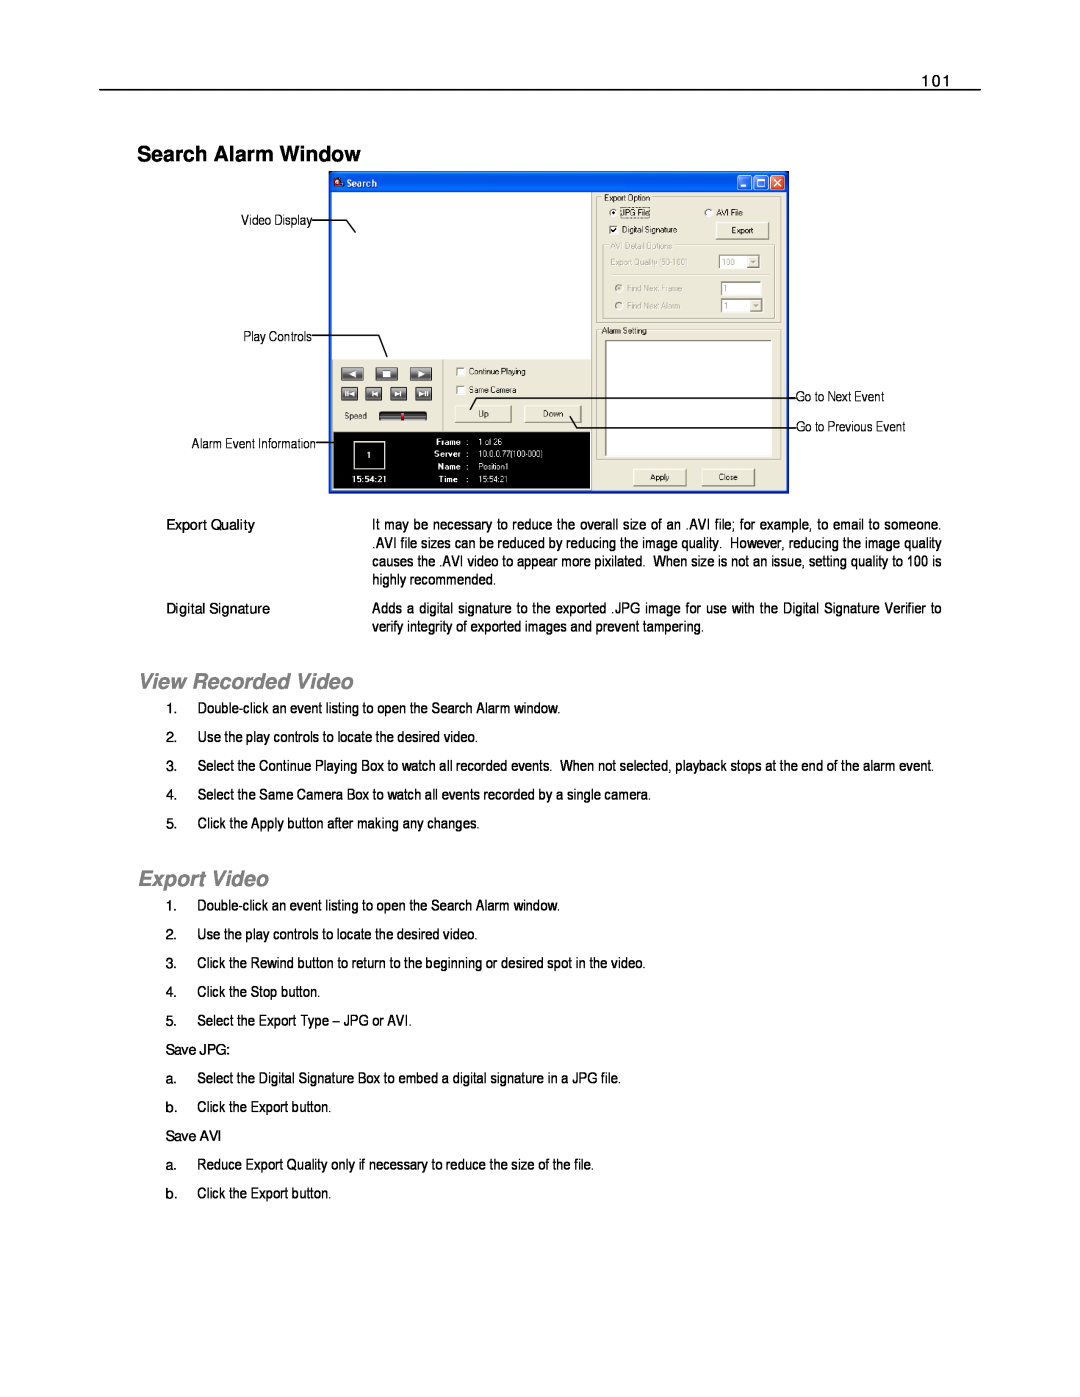 Toshiba EVR16-X Search Alarm Window, View Recorded Video, Export Video, Export Quality, Digital Signature, Save JPG 